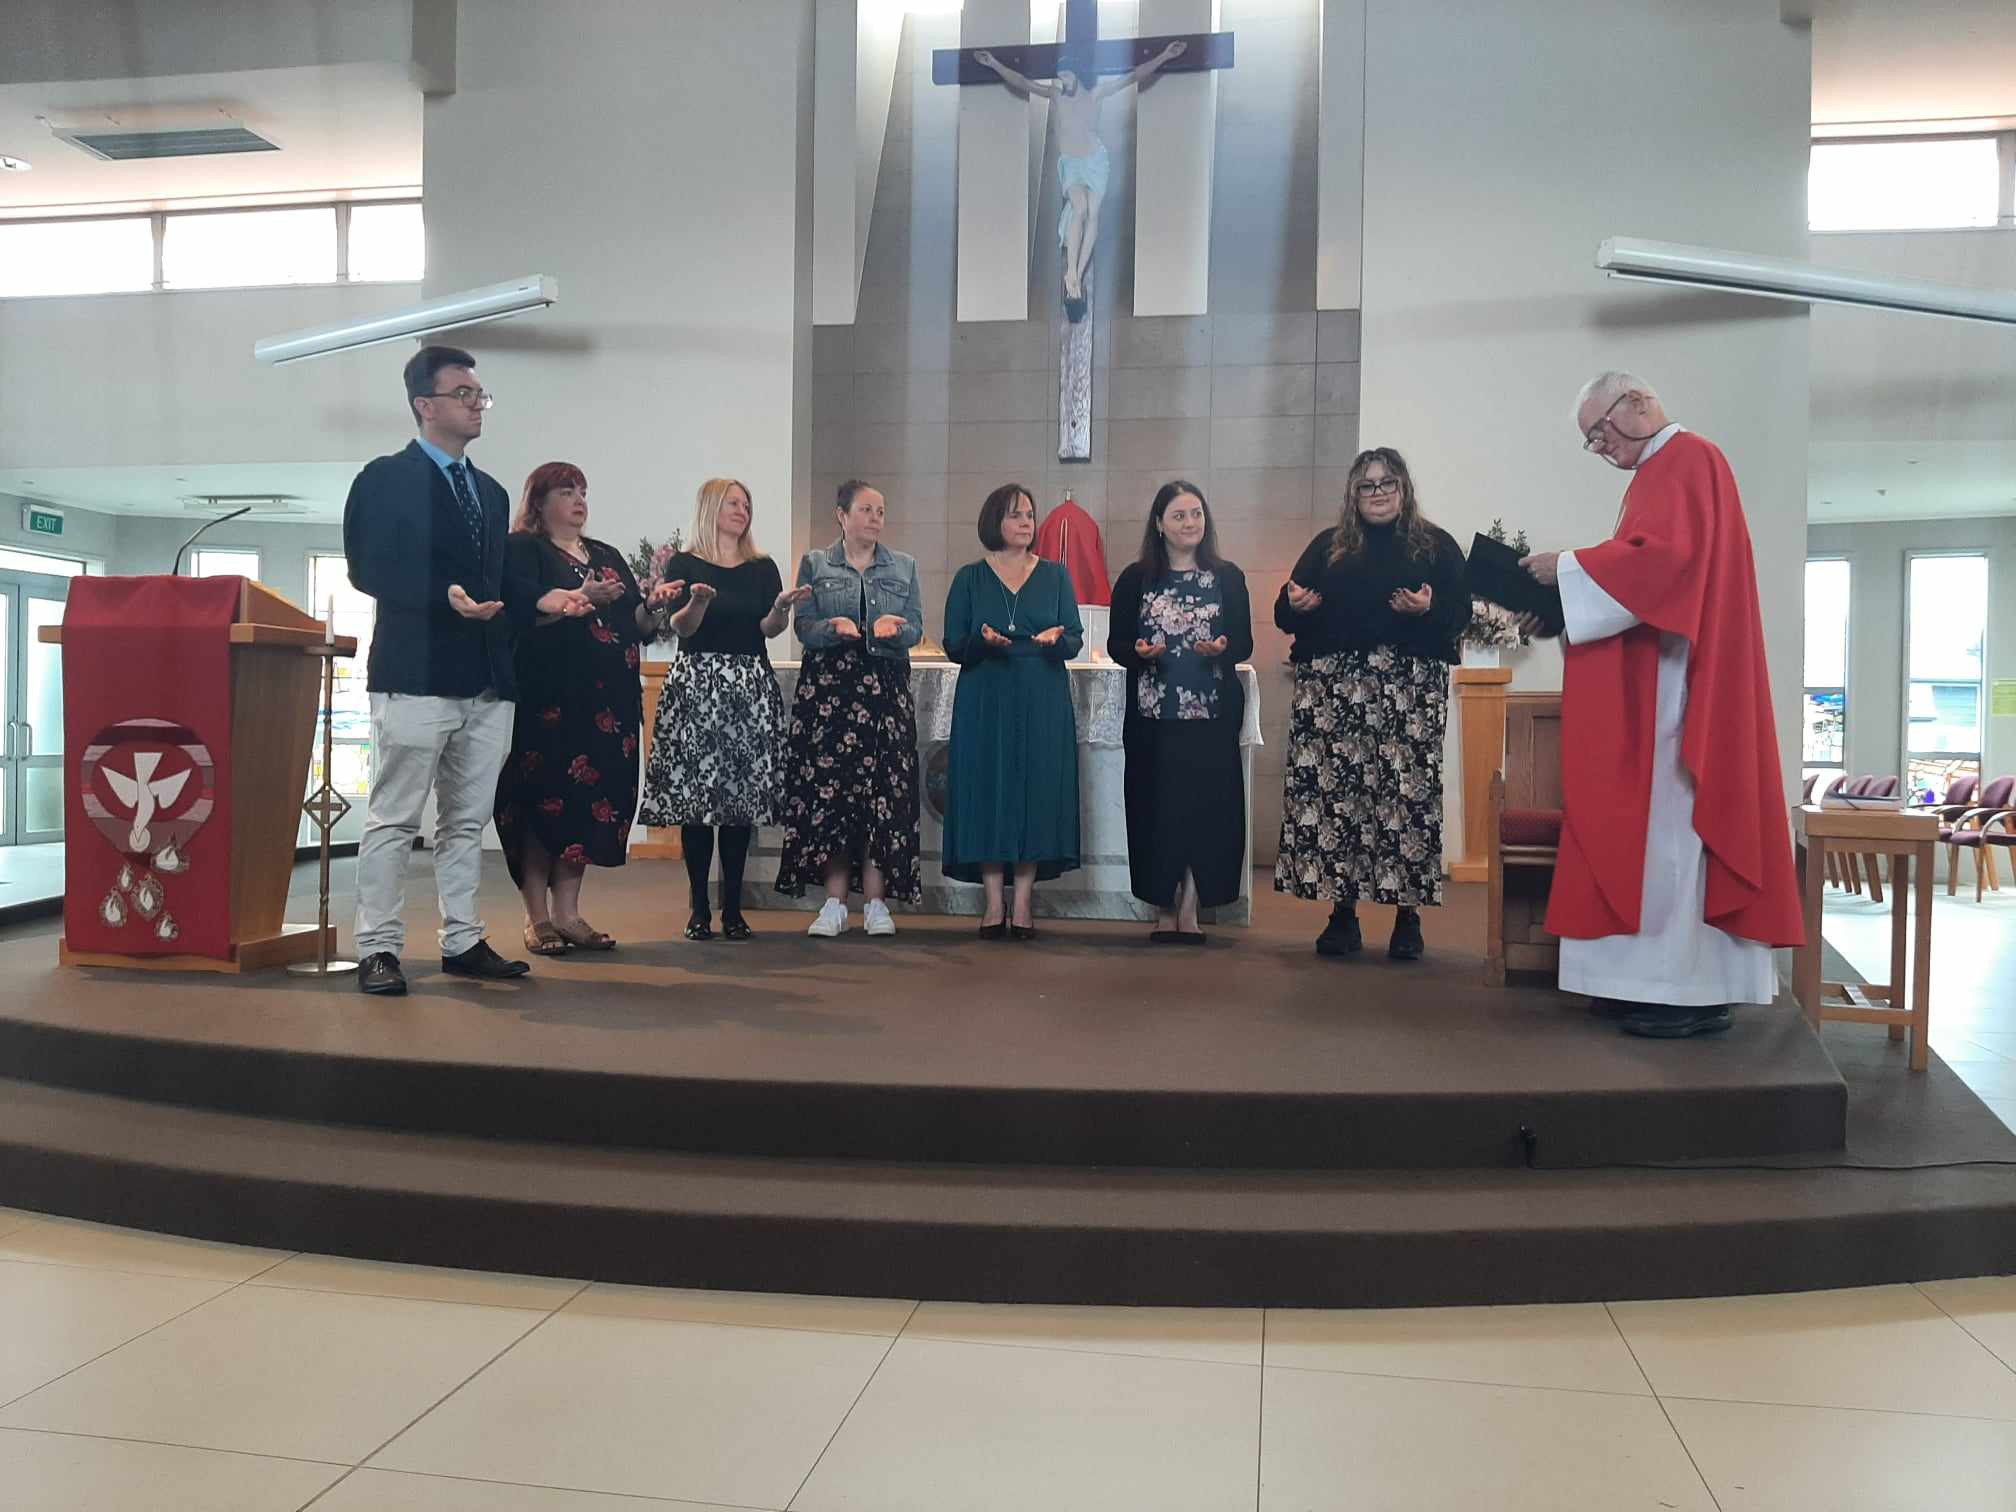 Commissioning of Our New Teachers